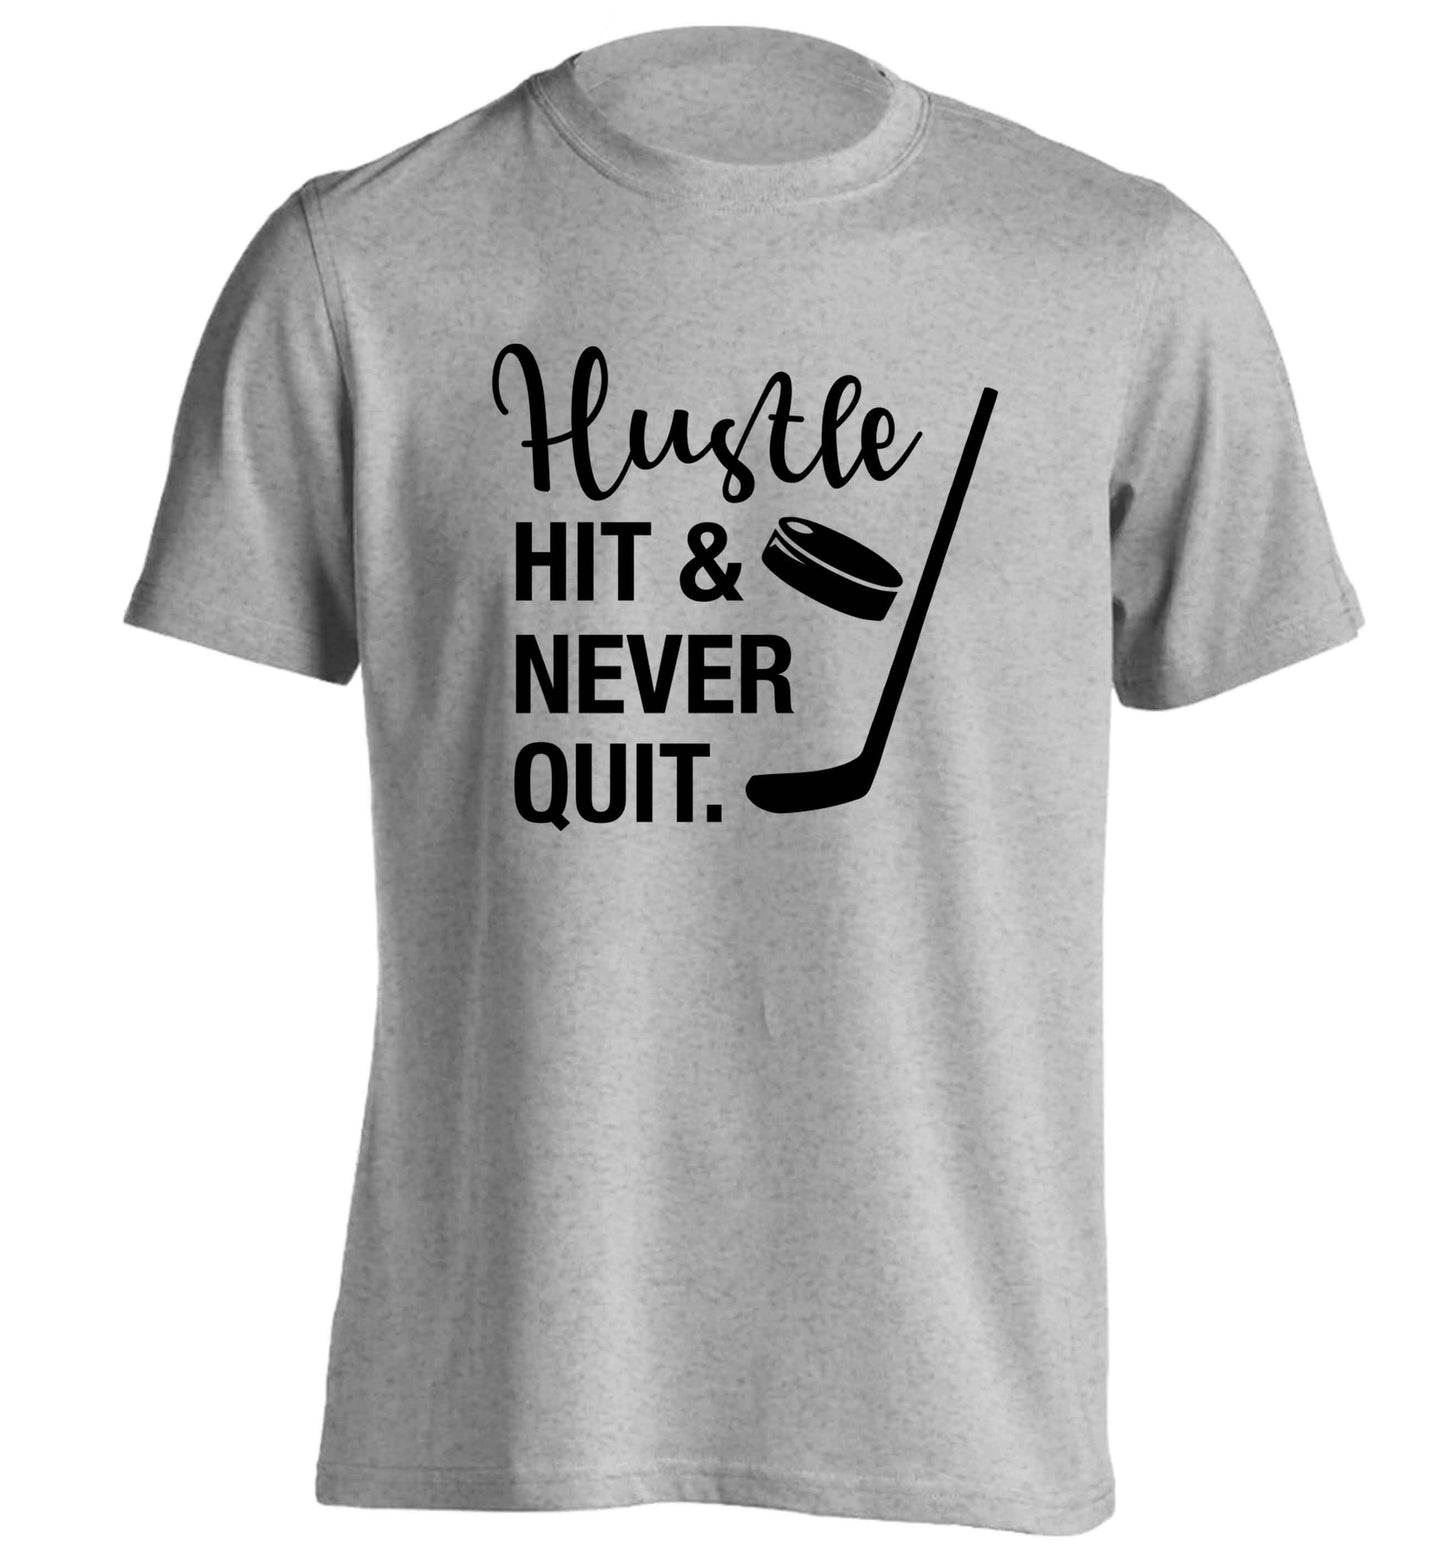 Hustle hit and never quit adults unisex grey Tshirt 2XL